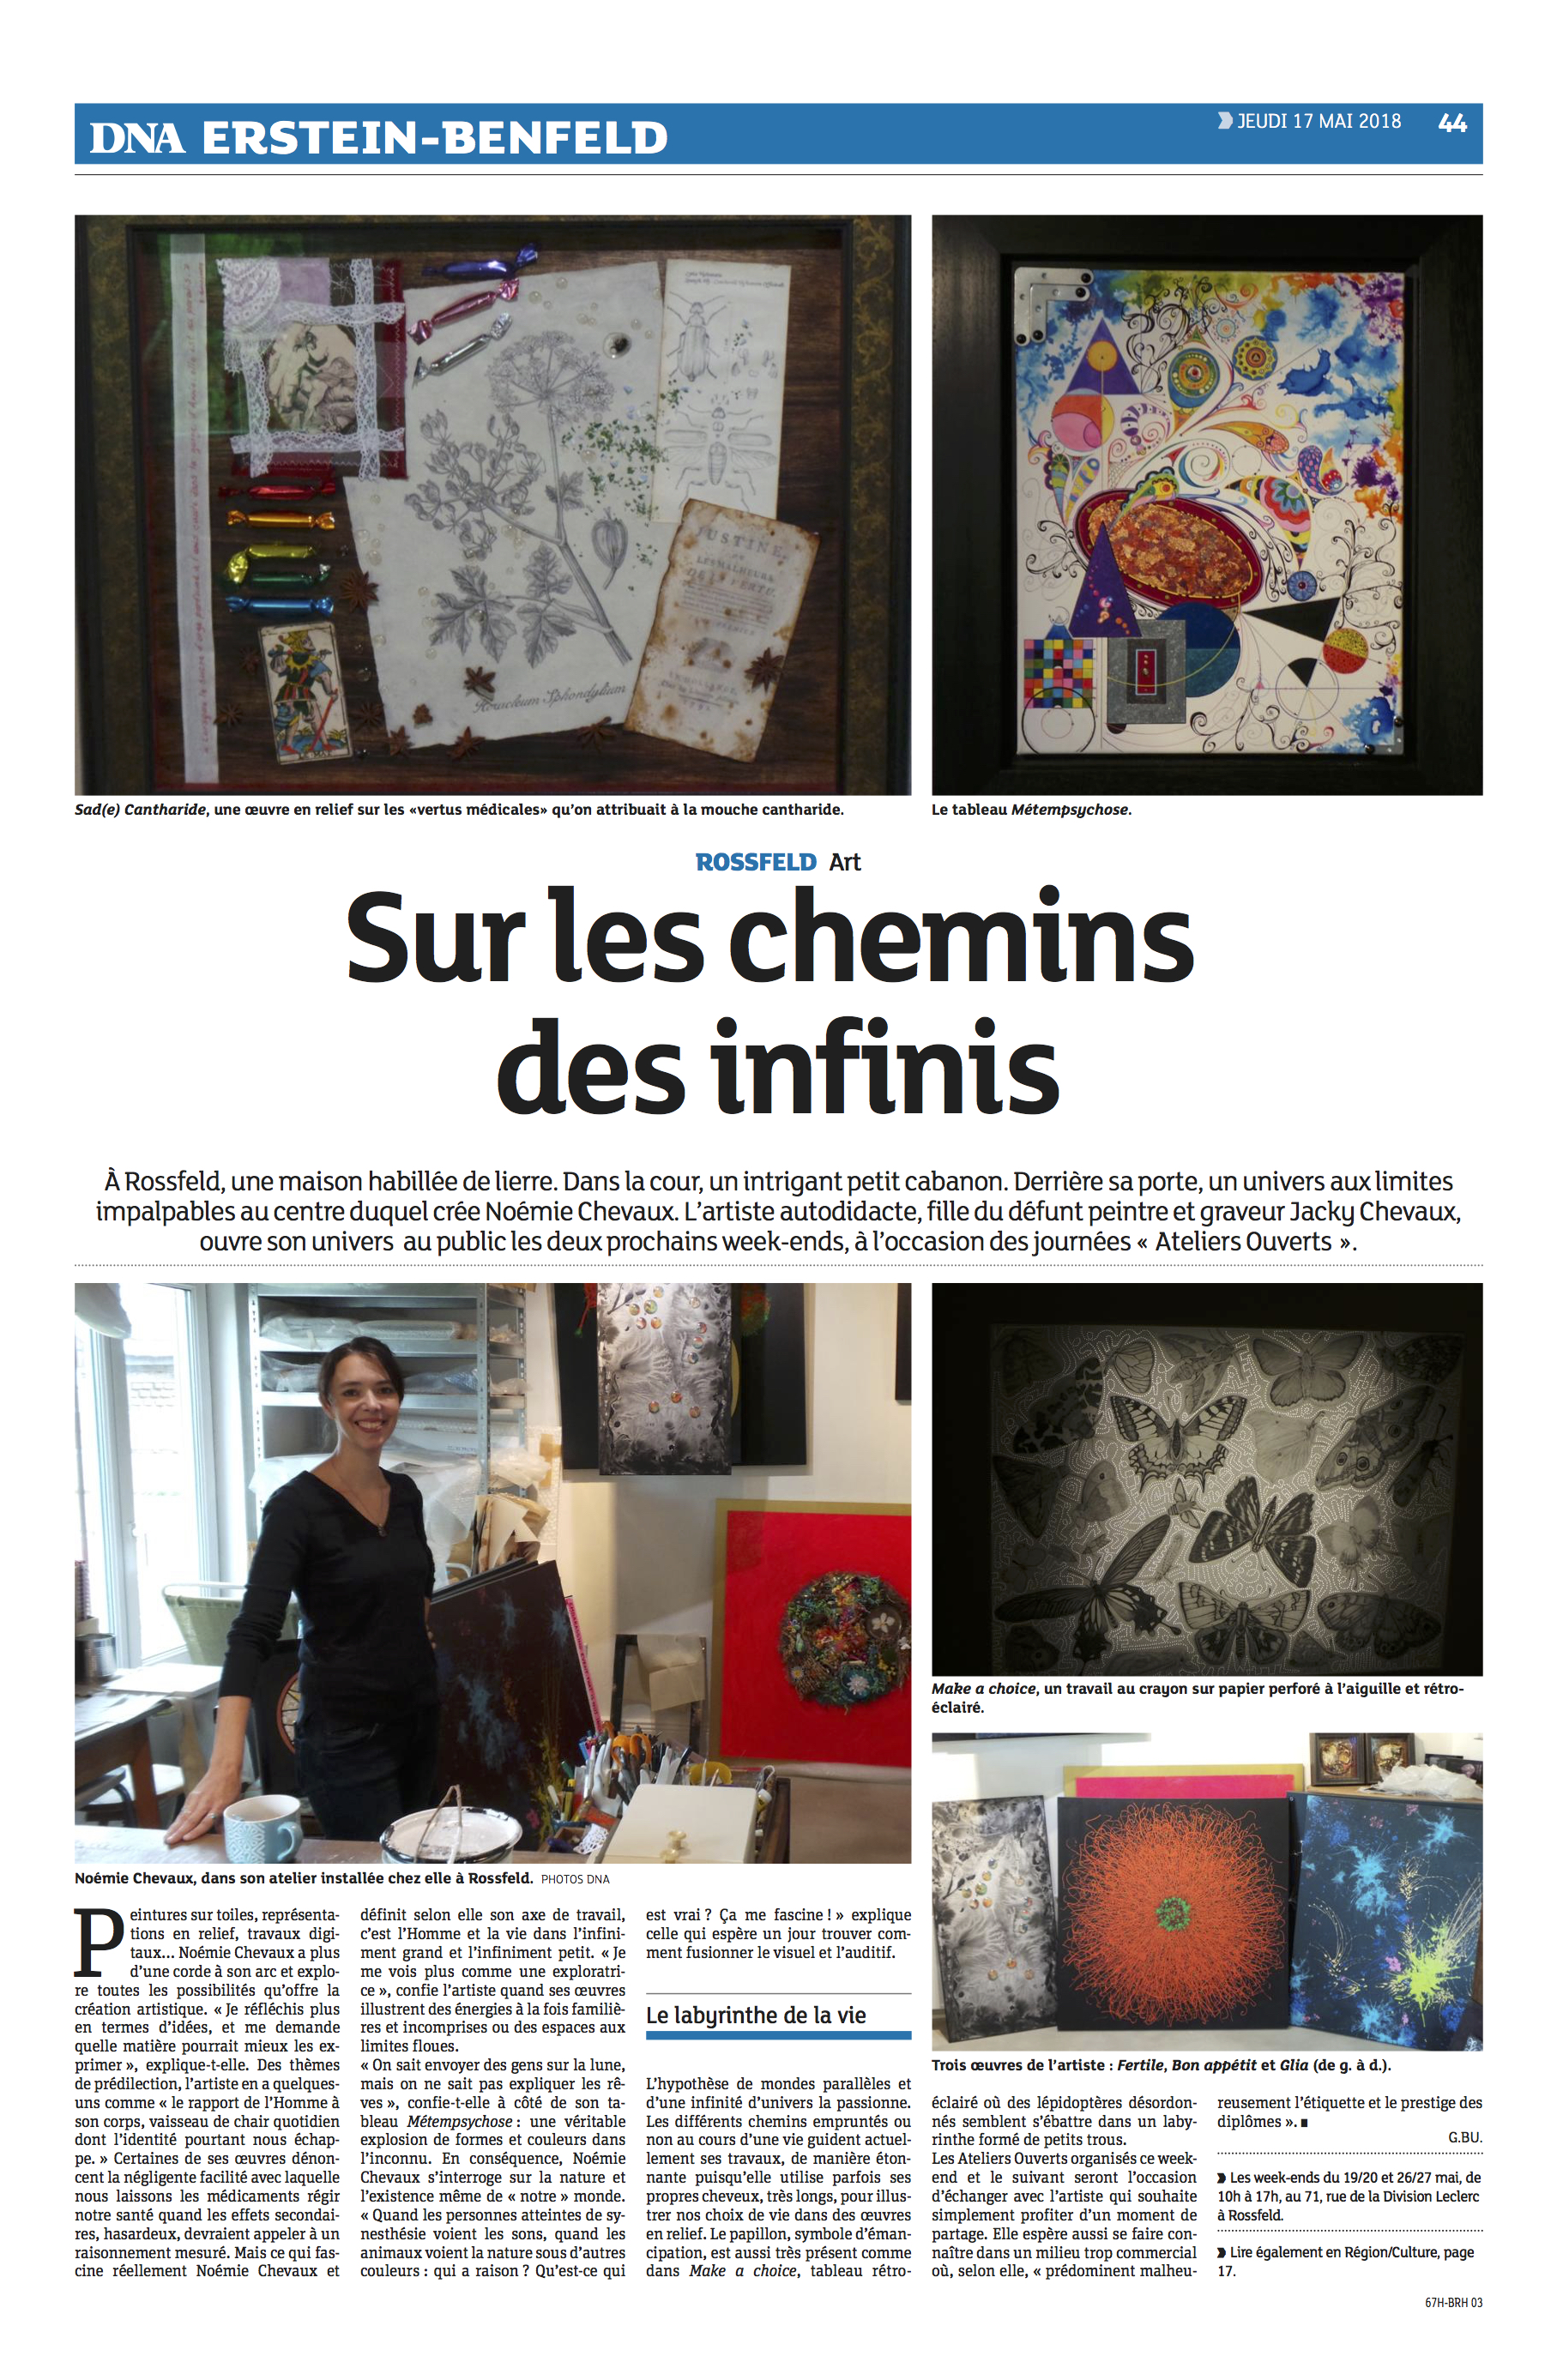 Article DNA Atelier Ouvert